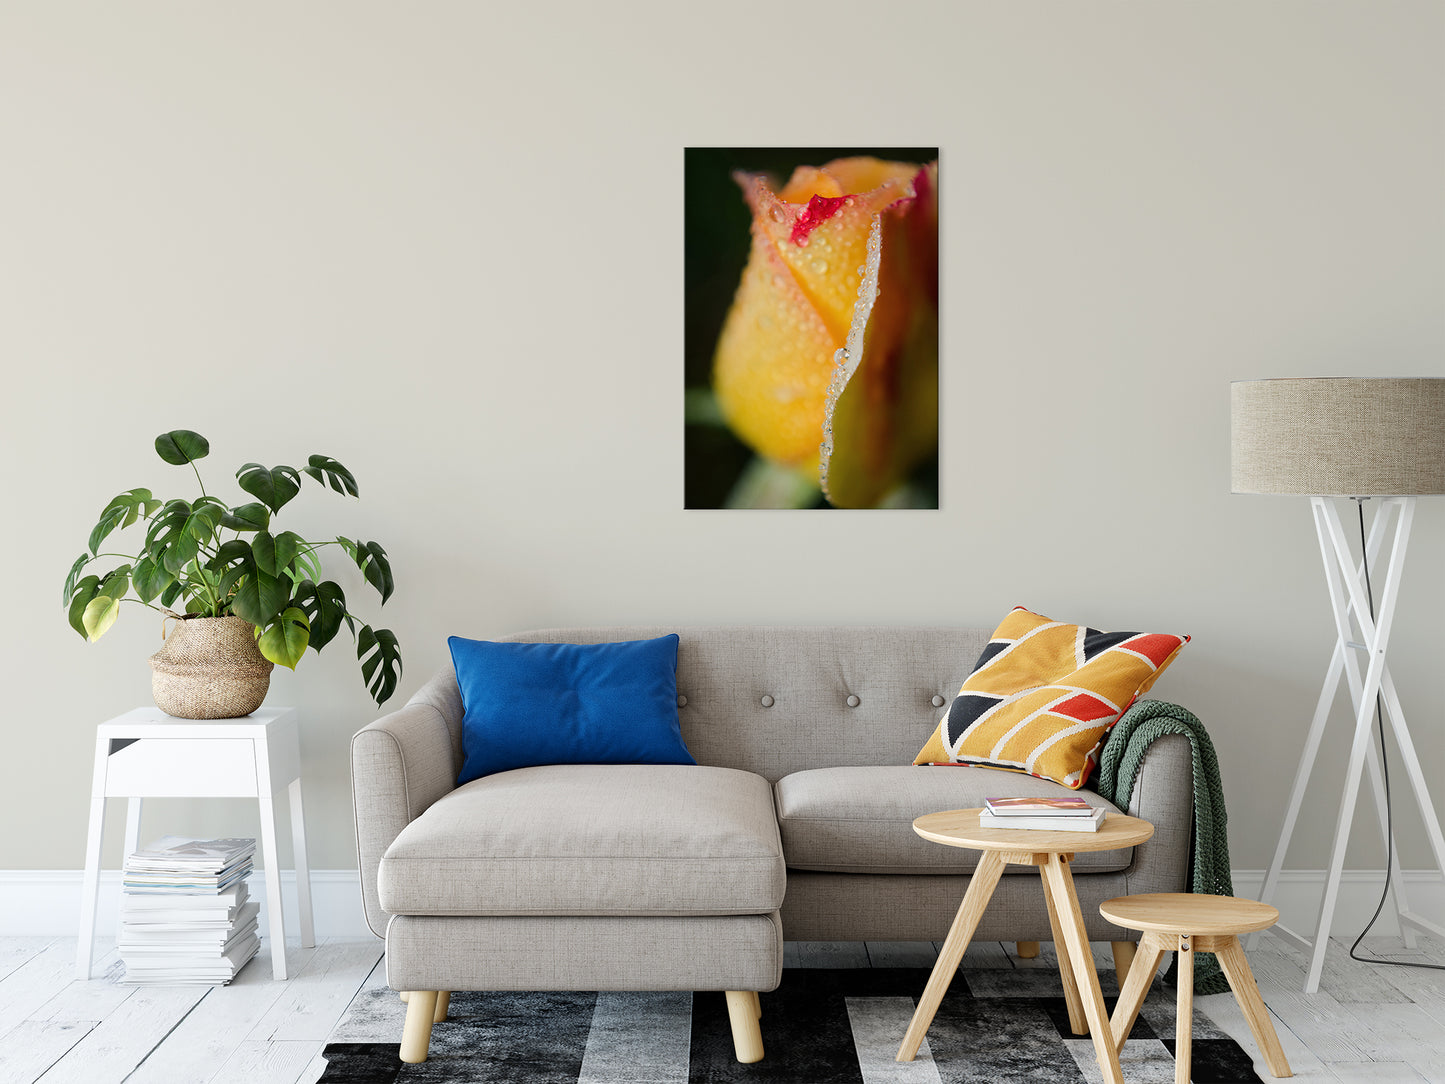 Dew on Yellow Rose Nature / Floral Photo Fine Art Canvas Wall Art Prints 24" x 36" - PIPAFINEART